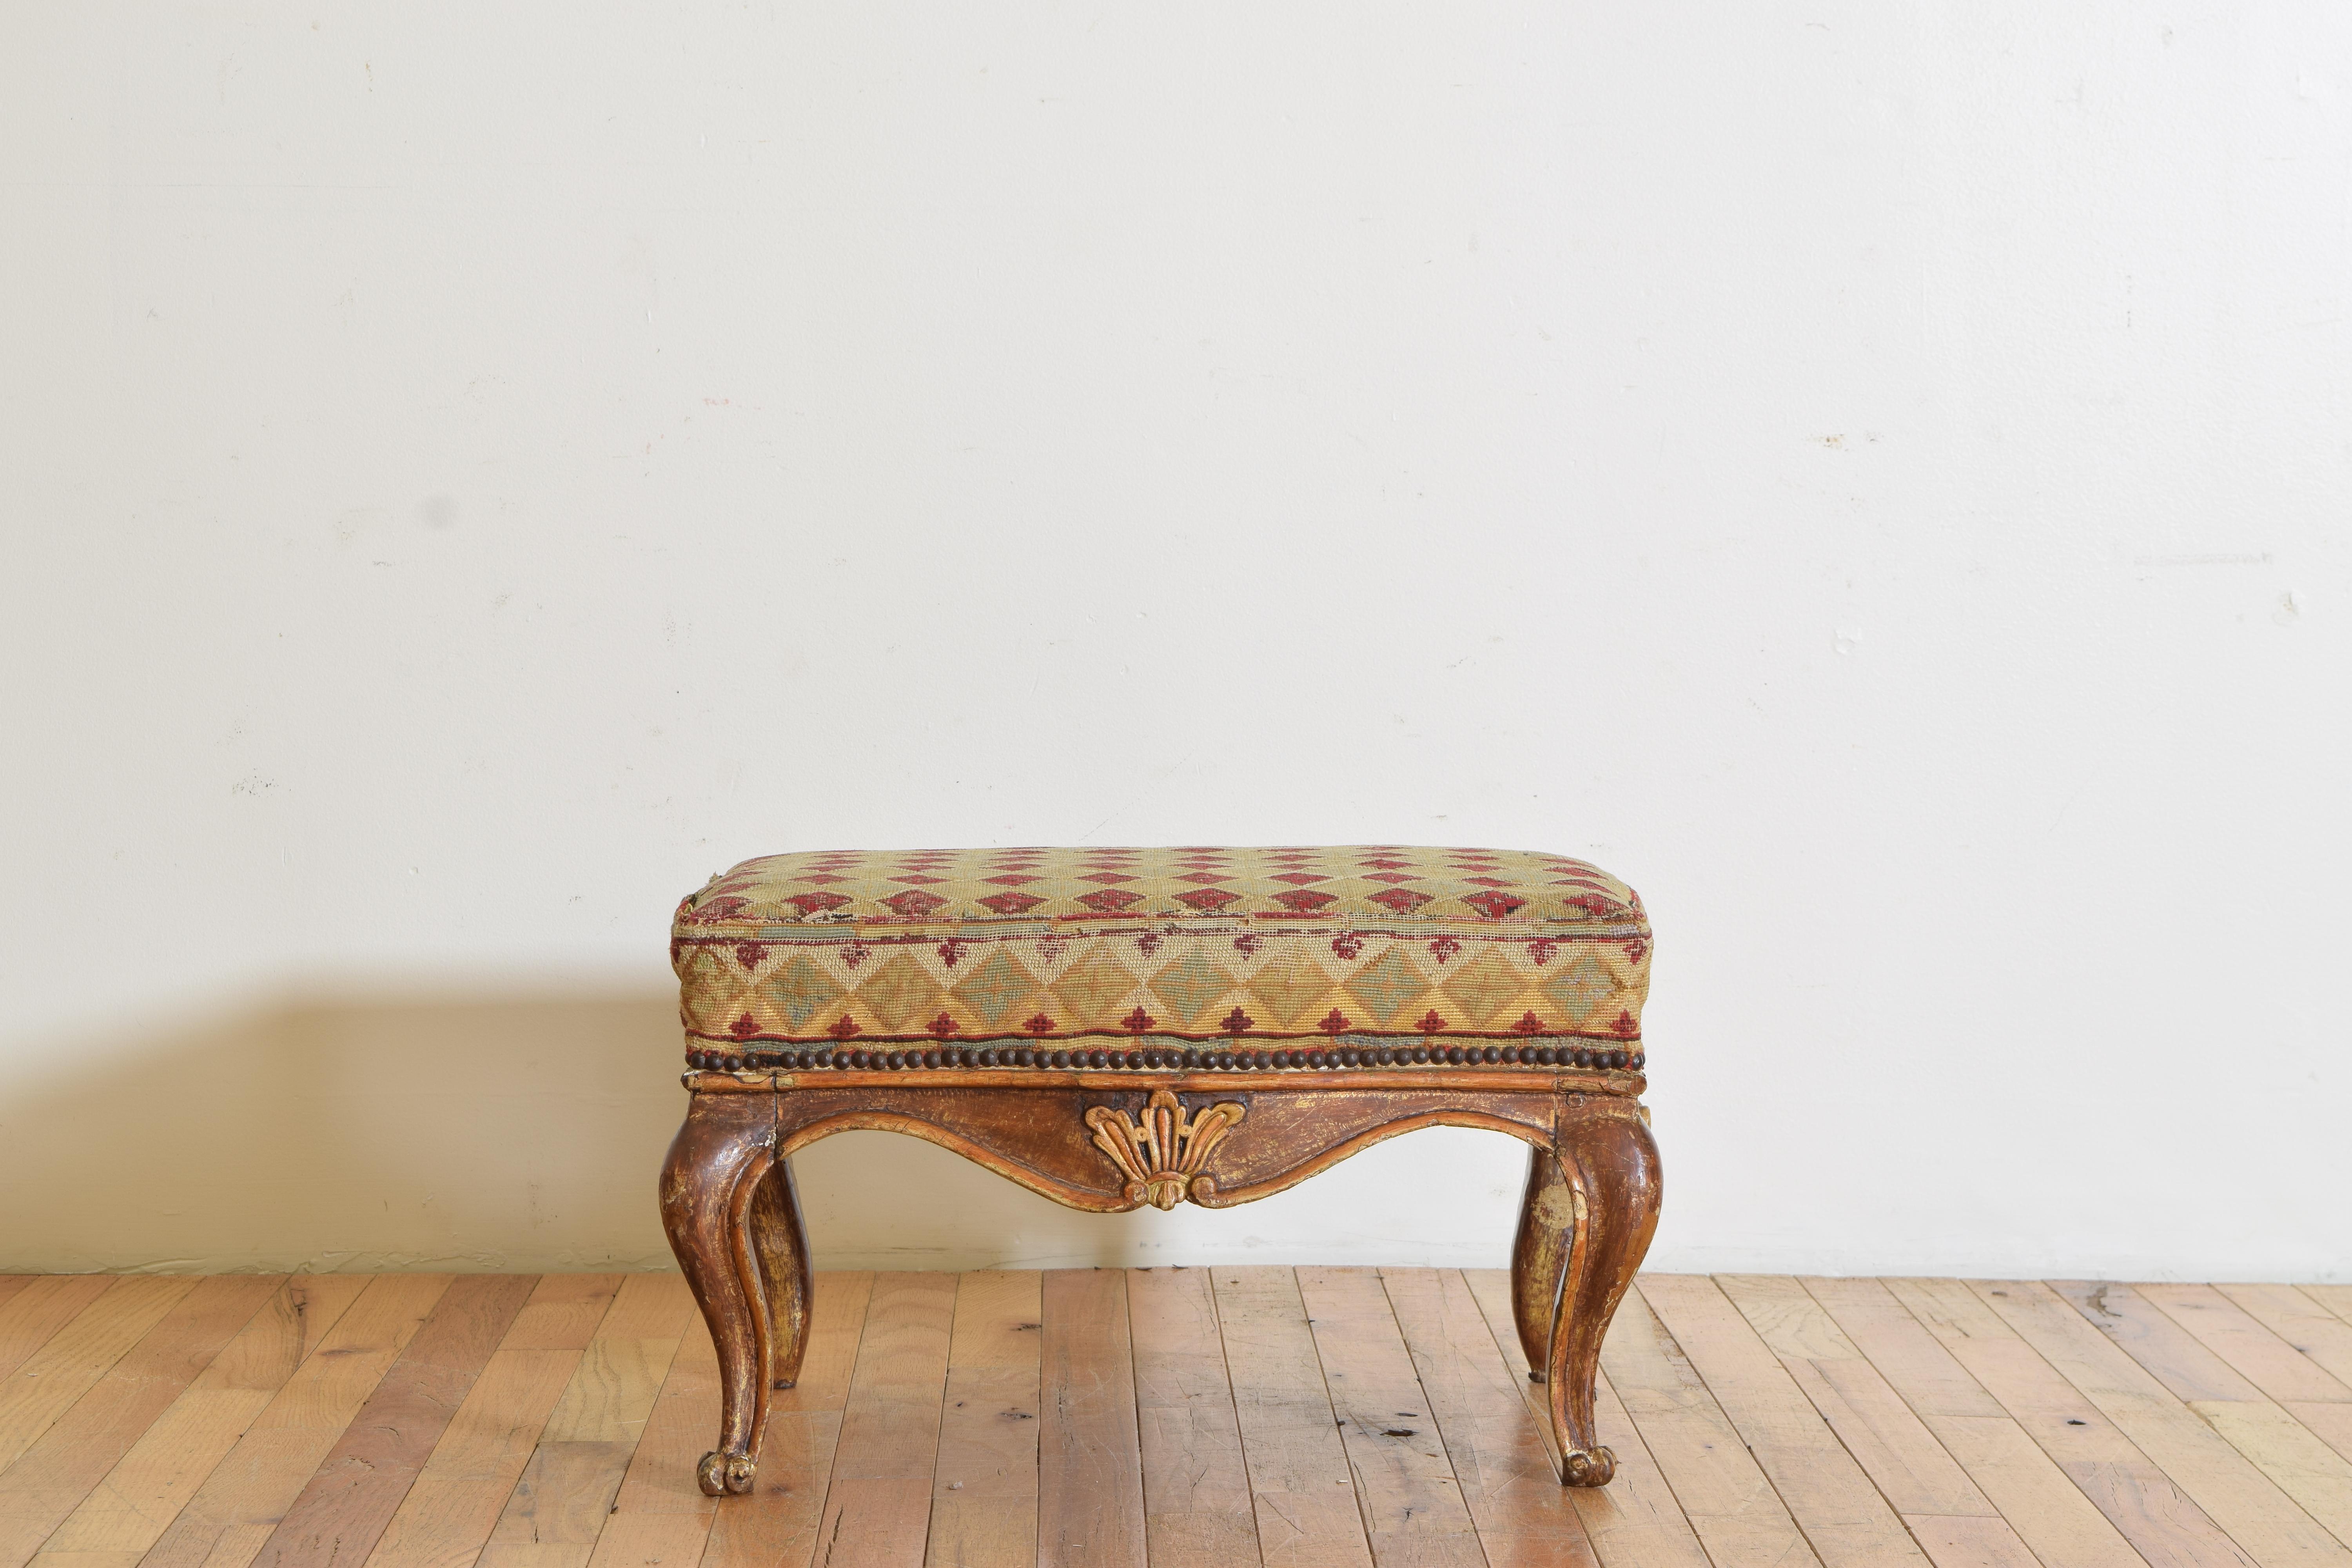 Louis XV Italian, Piemontese, Rococo Period Lacquered and Gilded Footstool, Mid 18th Cen. For Sale